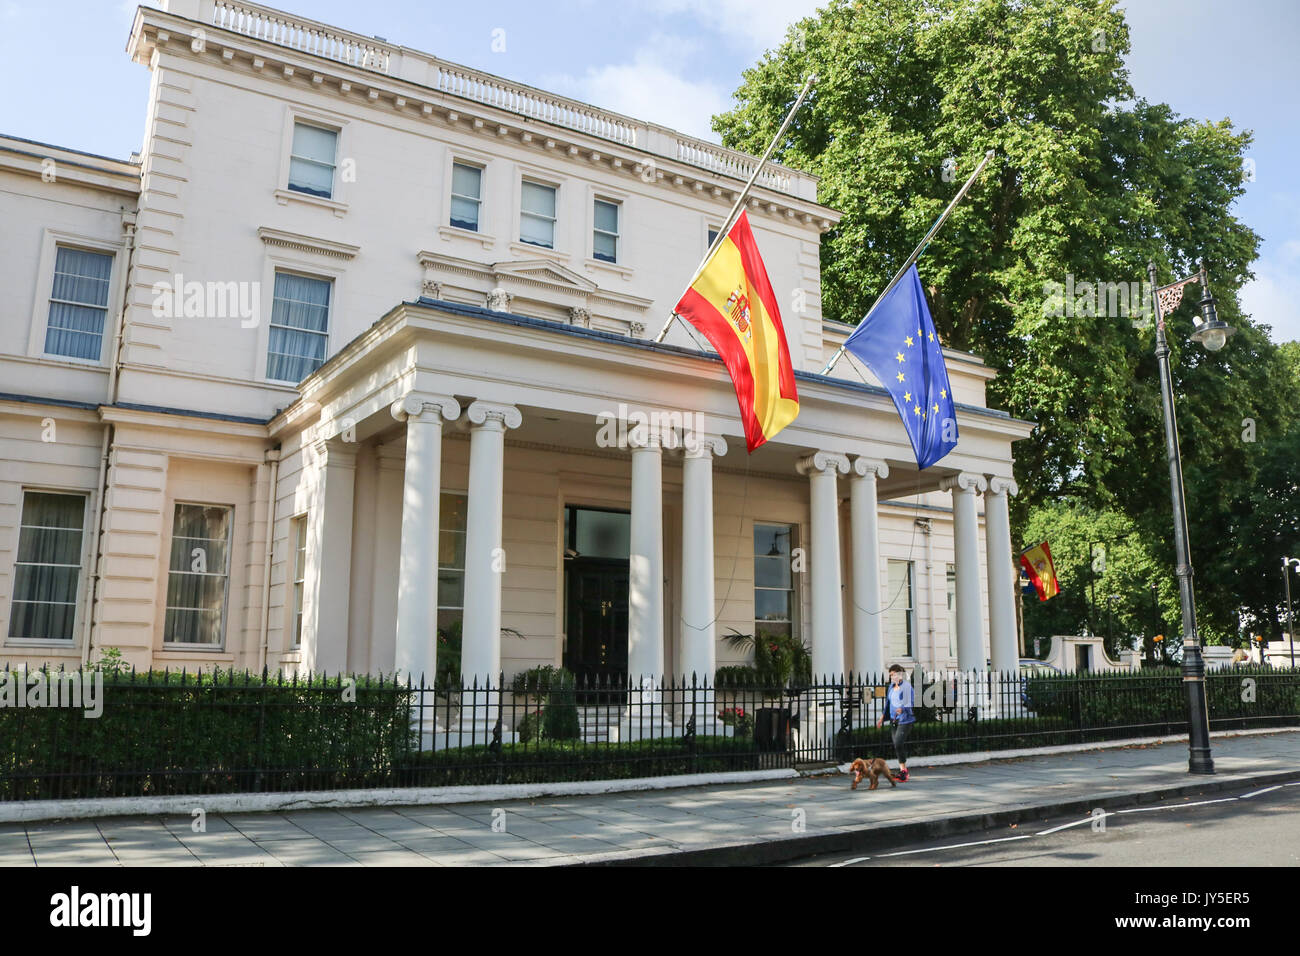 London, UK. 18th August, 2017. Flags of Spain and Europe are lowered at half mast above the Spanish embassy in London following the terror attacks in Barcelona involving Islamic militants using a van to kill many tourists and civilians in the busy tourist street of Las Ramblas, Barcelona on Thursday 17th August Credit: amer ghazzal/Alamy Live News Stock Photo